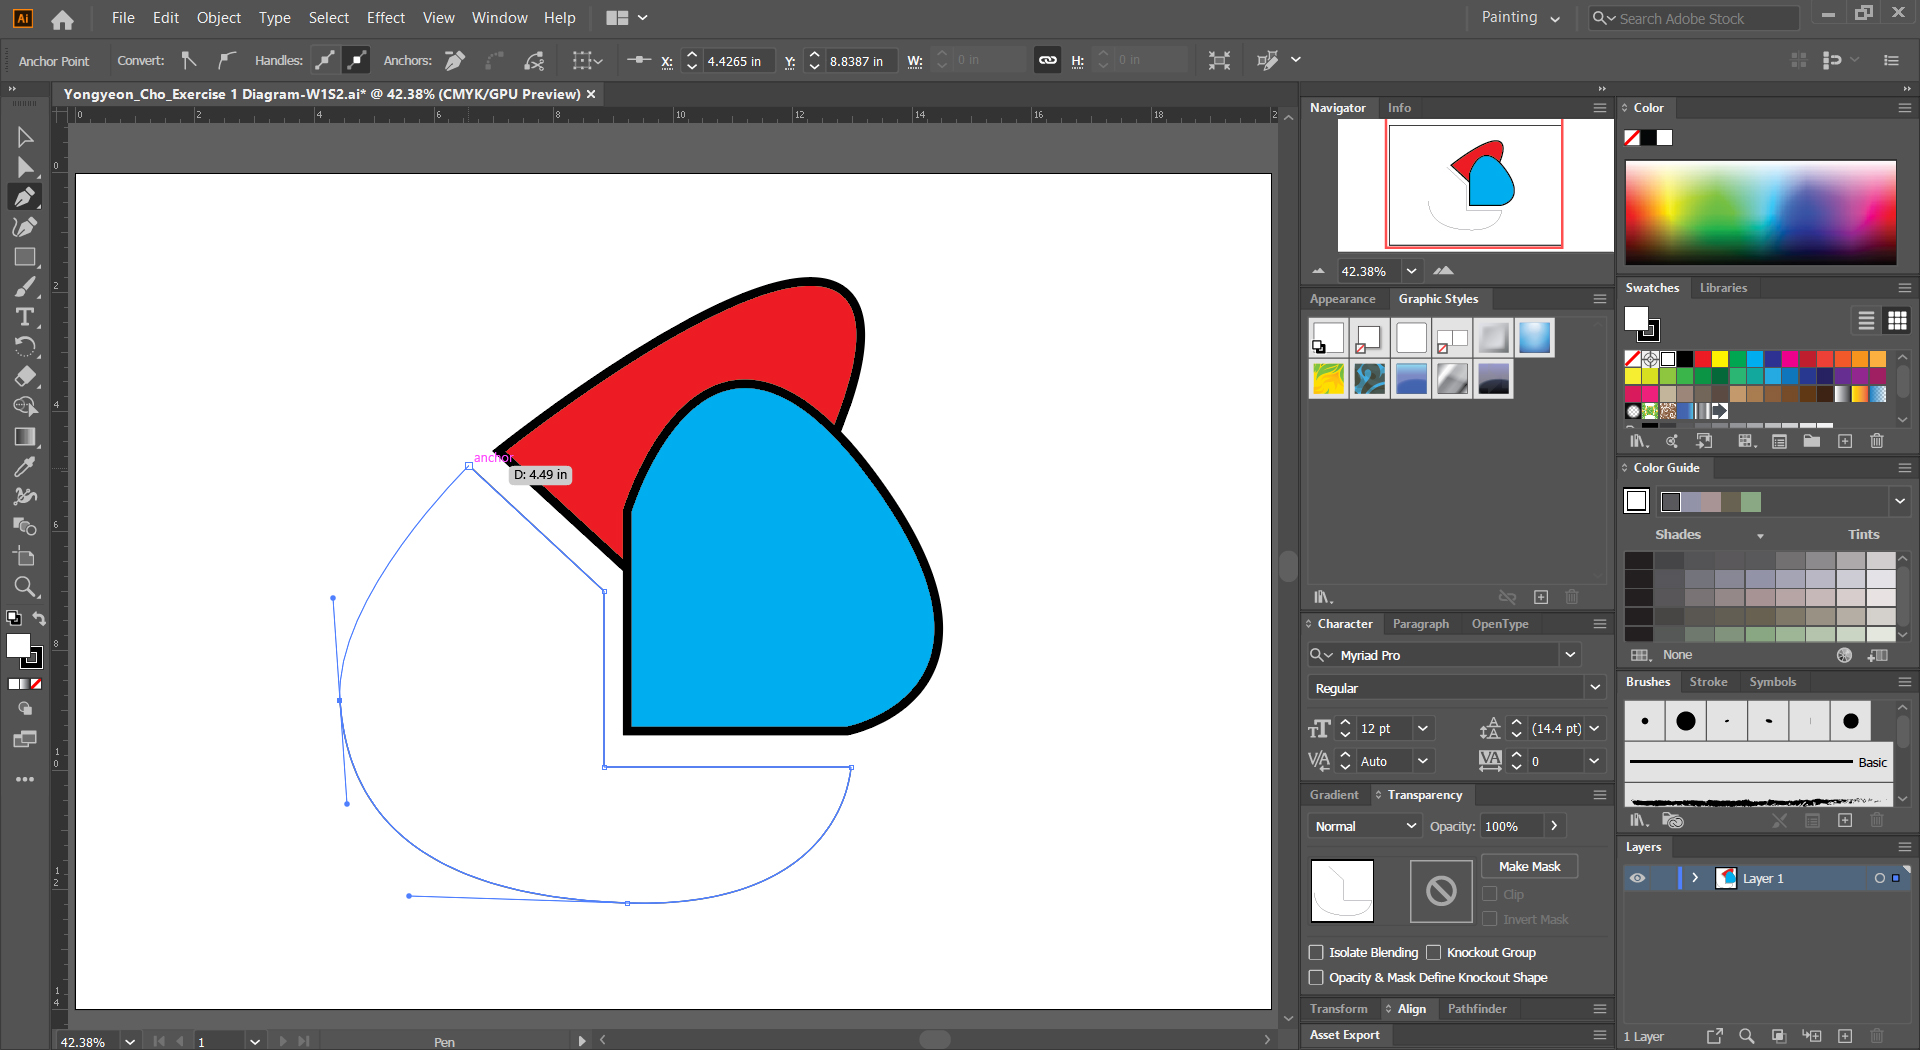 It shows how to draw an object with pen tool.